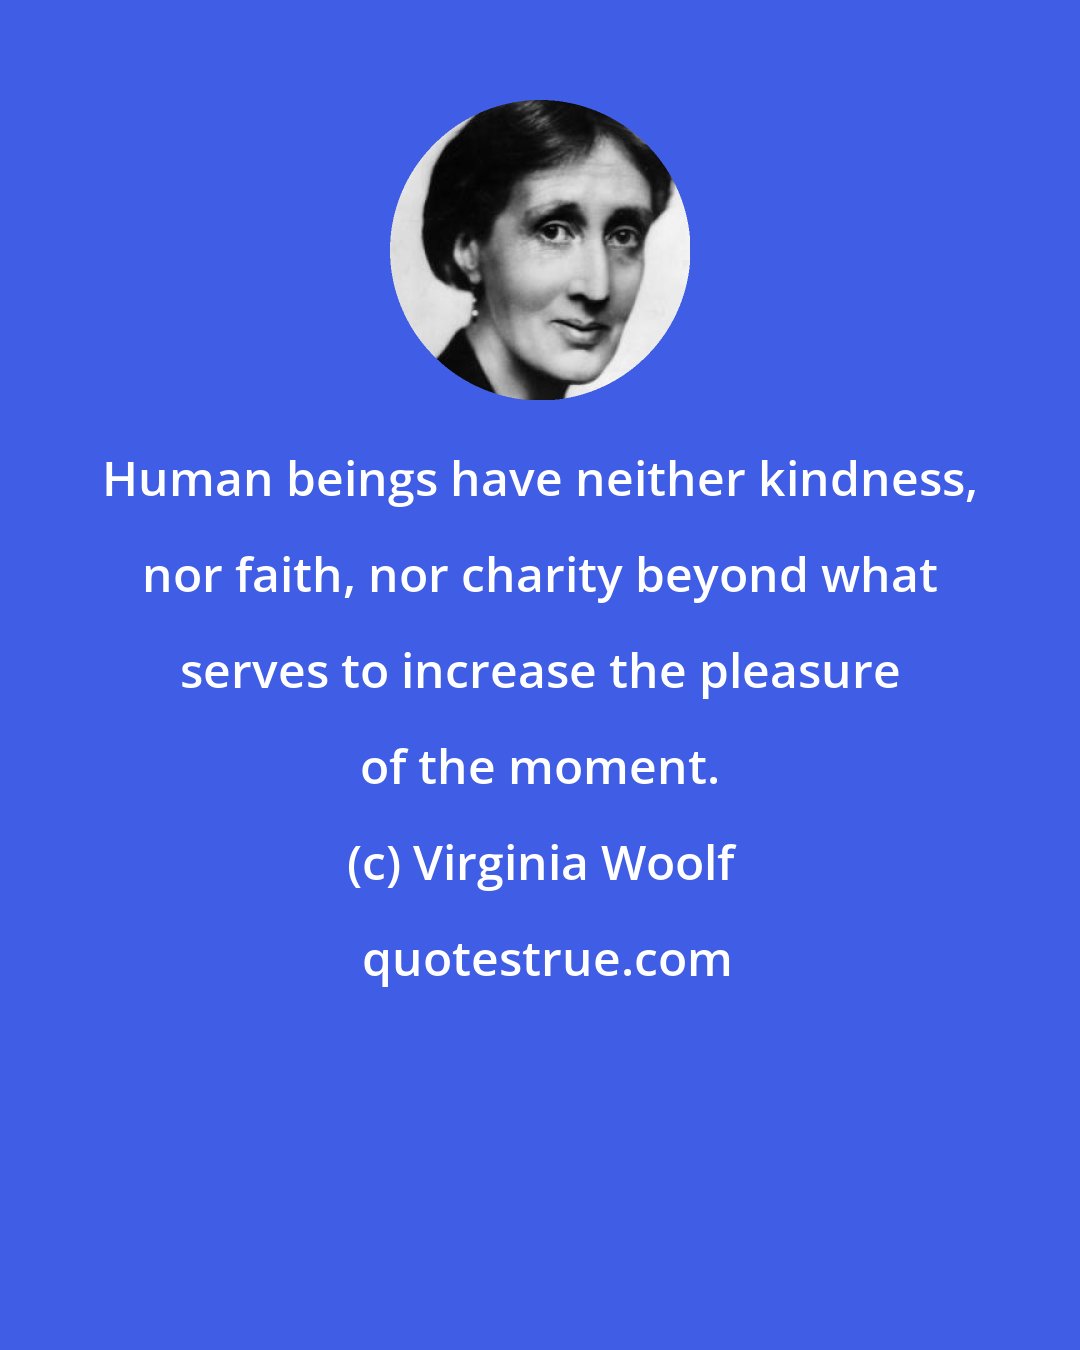 Virginia Woolf: Human beings have neither kindness, nor faith, nor charity beyond what serves to increase the pleasure of the moment.